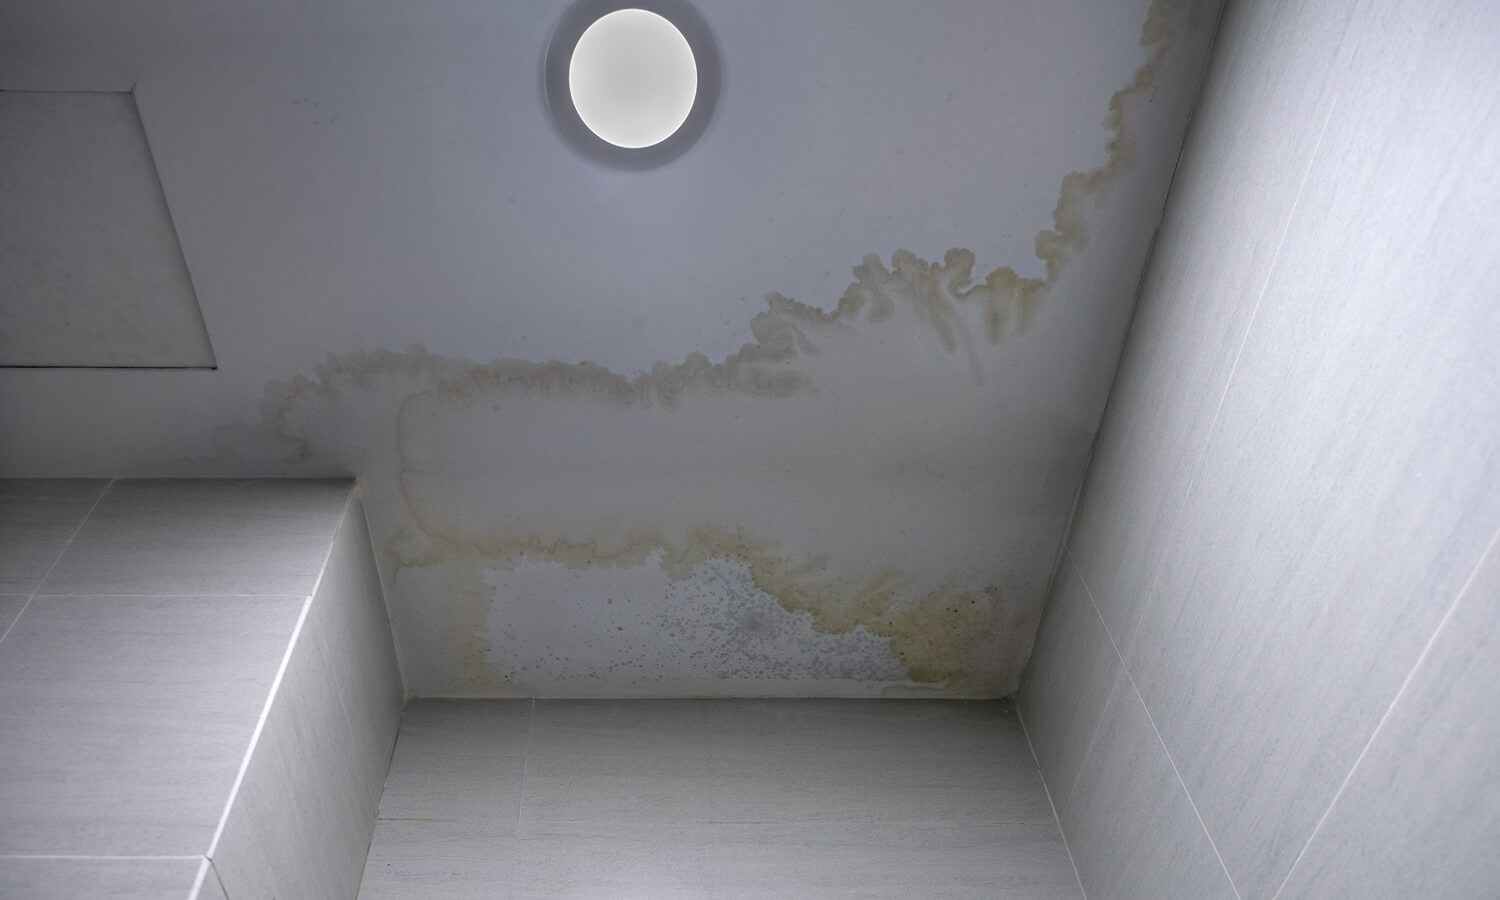 mold after water damage